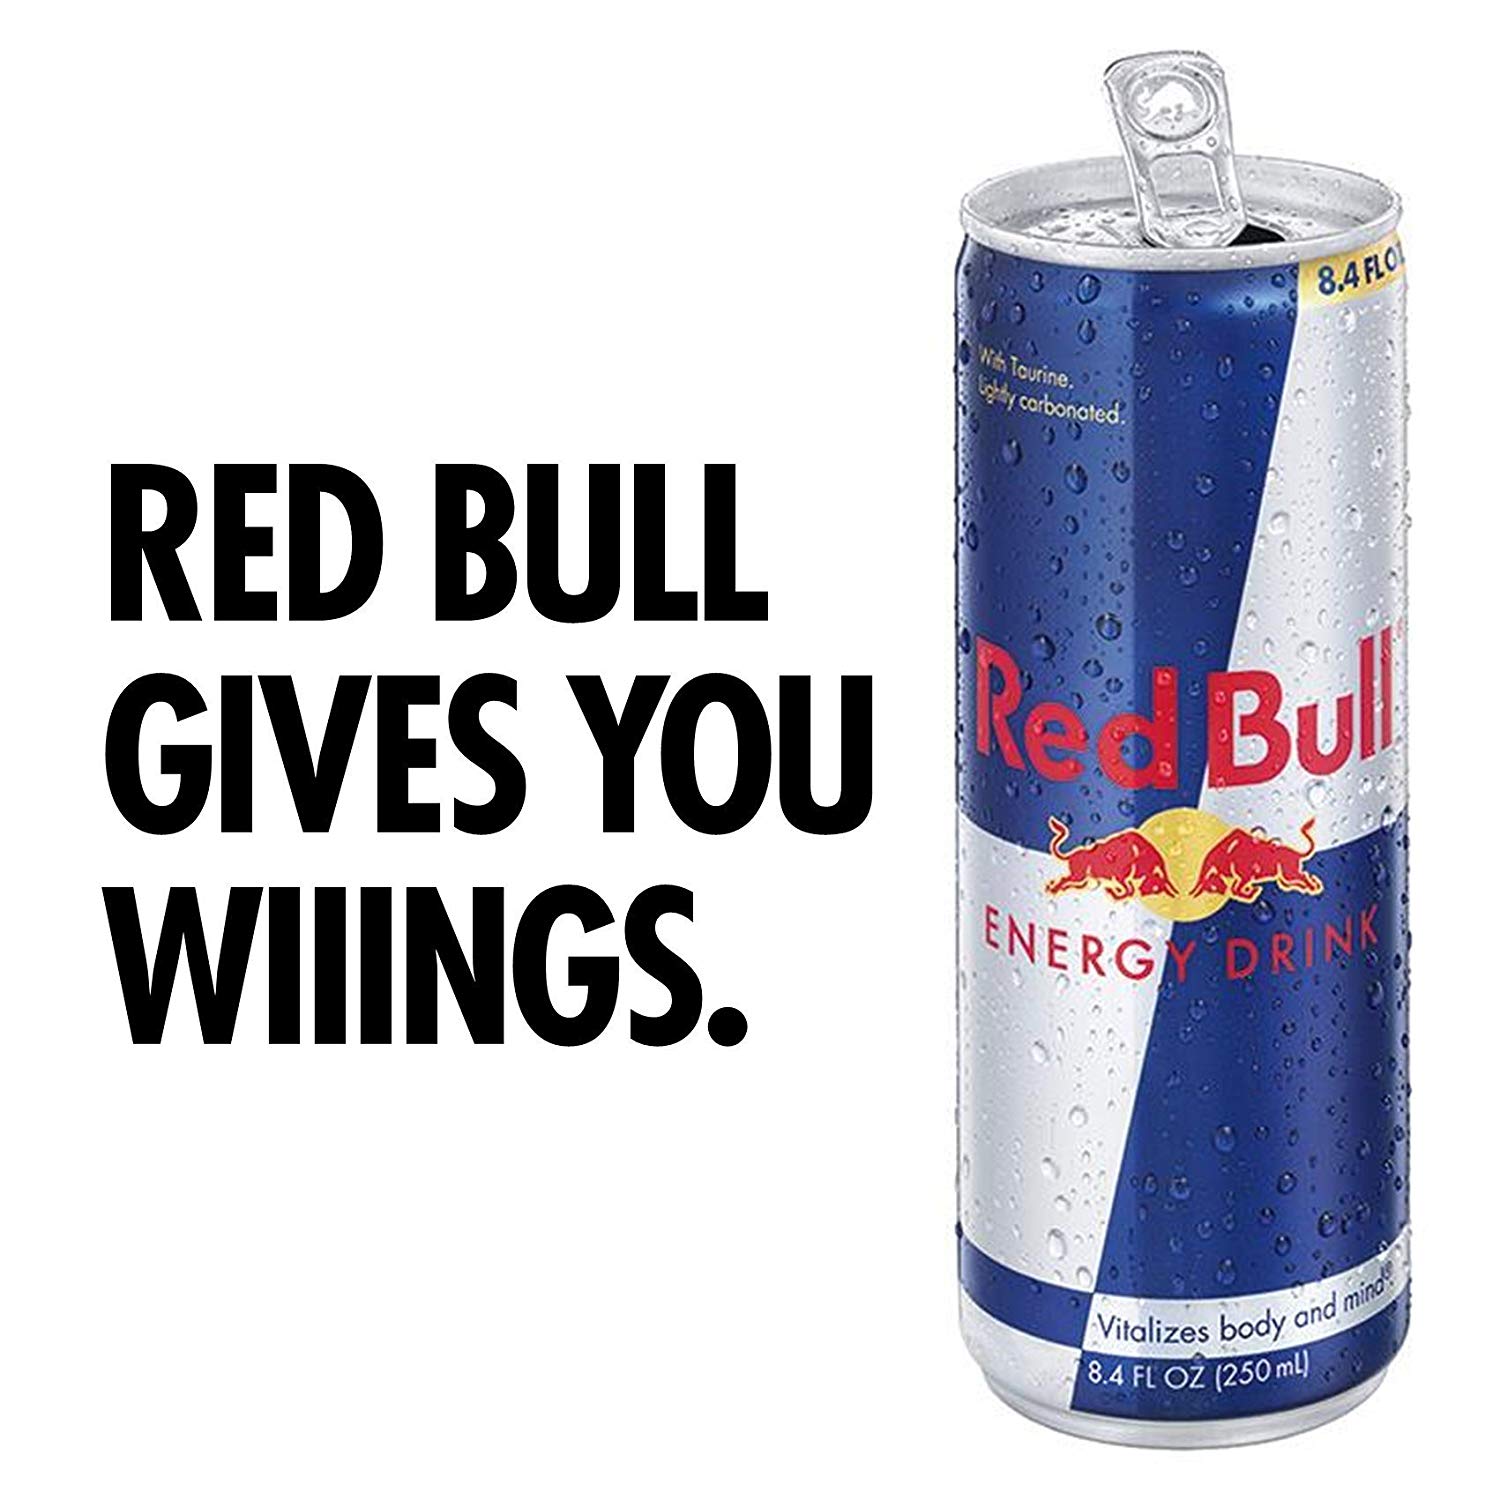 e-contrast-uk-asa-rules-that-red-bull-ad-implied-that-the-energy